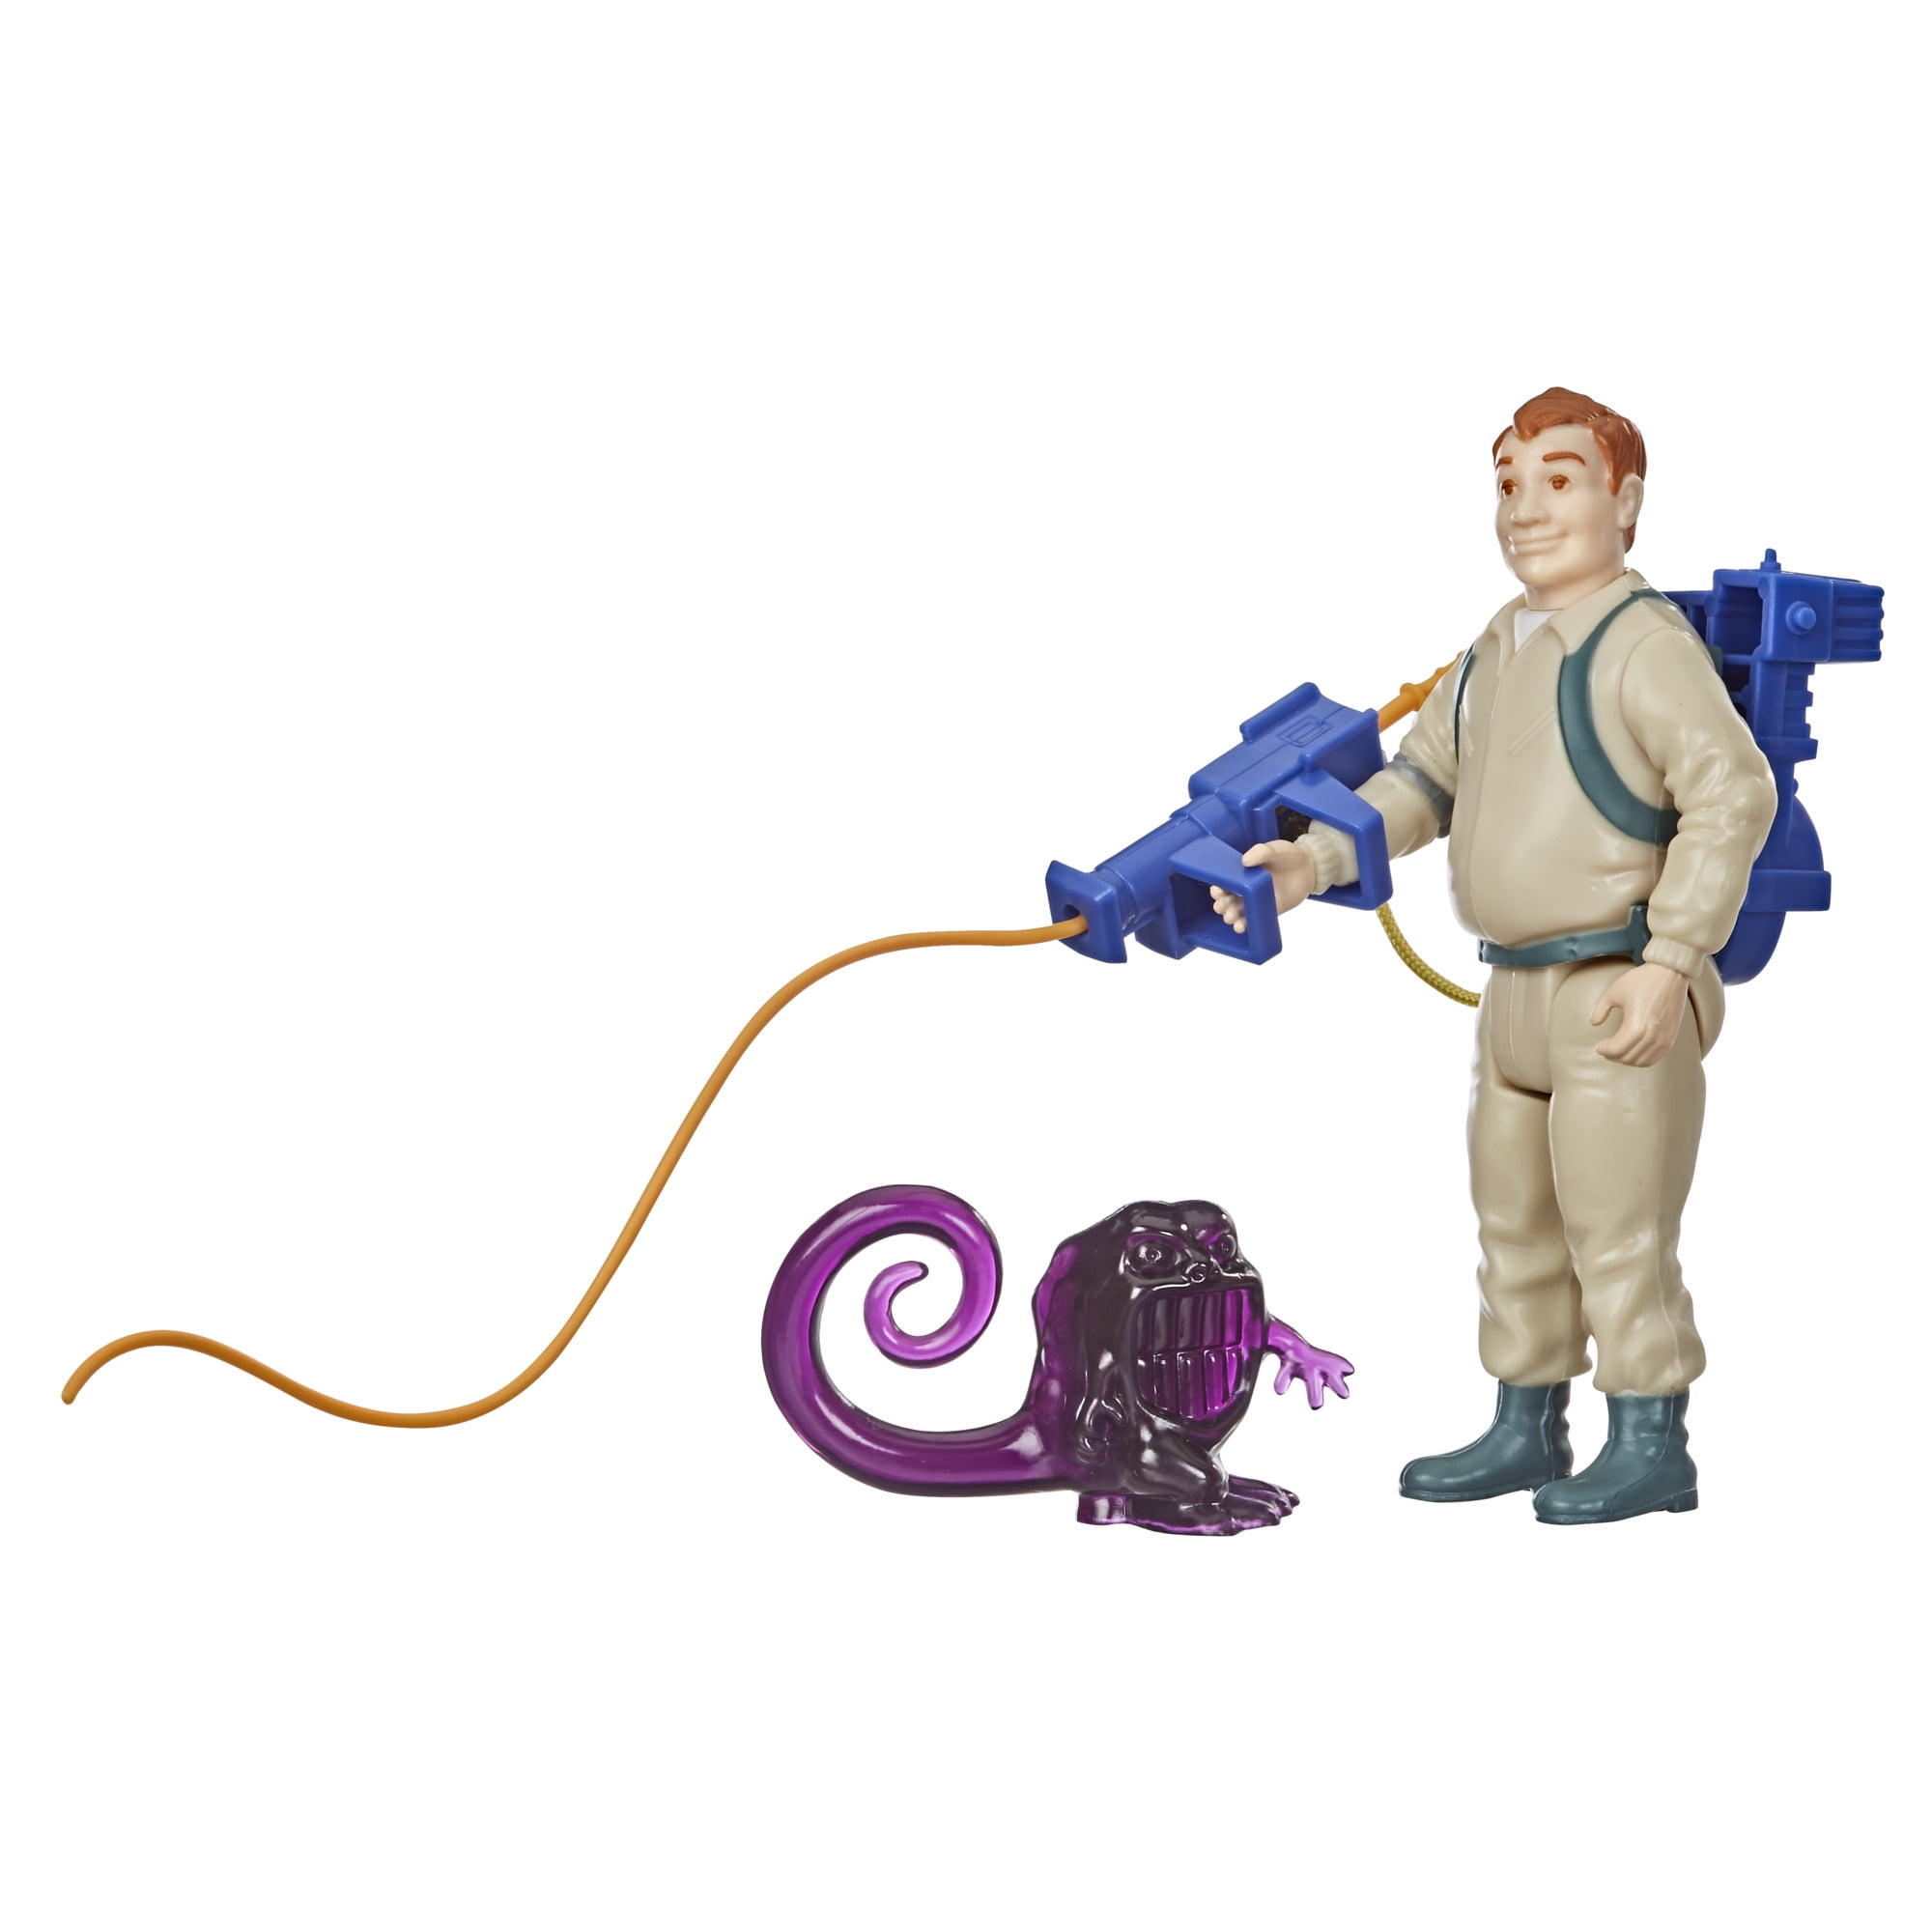 Kenner The Real Ghostbusters Retro Action Figure Set Of 4 Walmart 2020 Exclusive